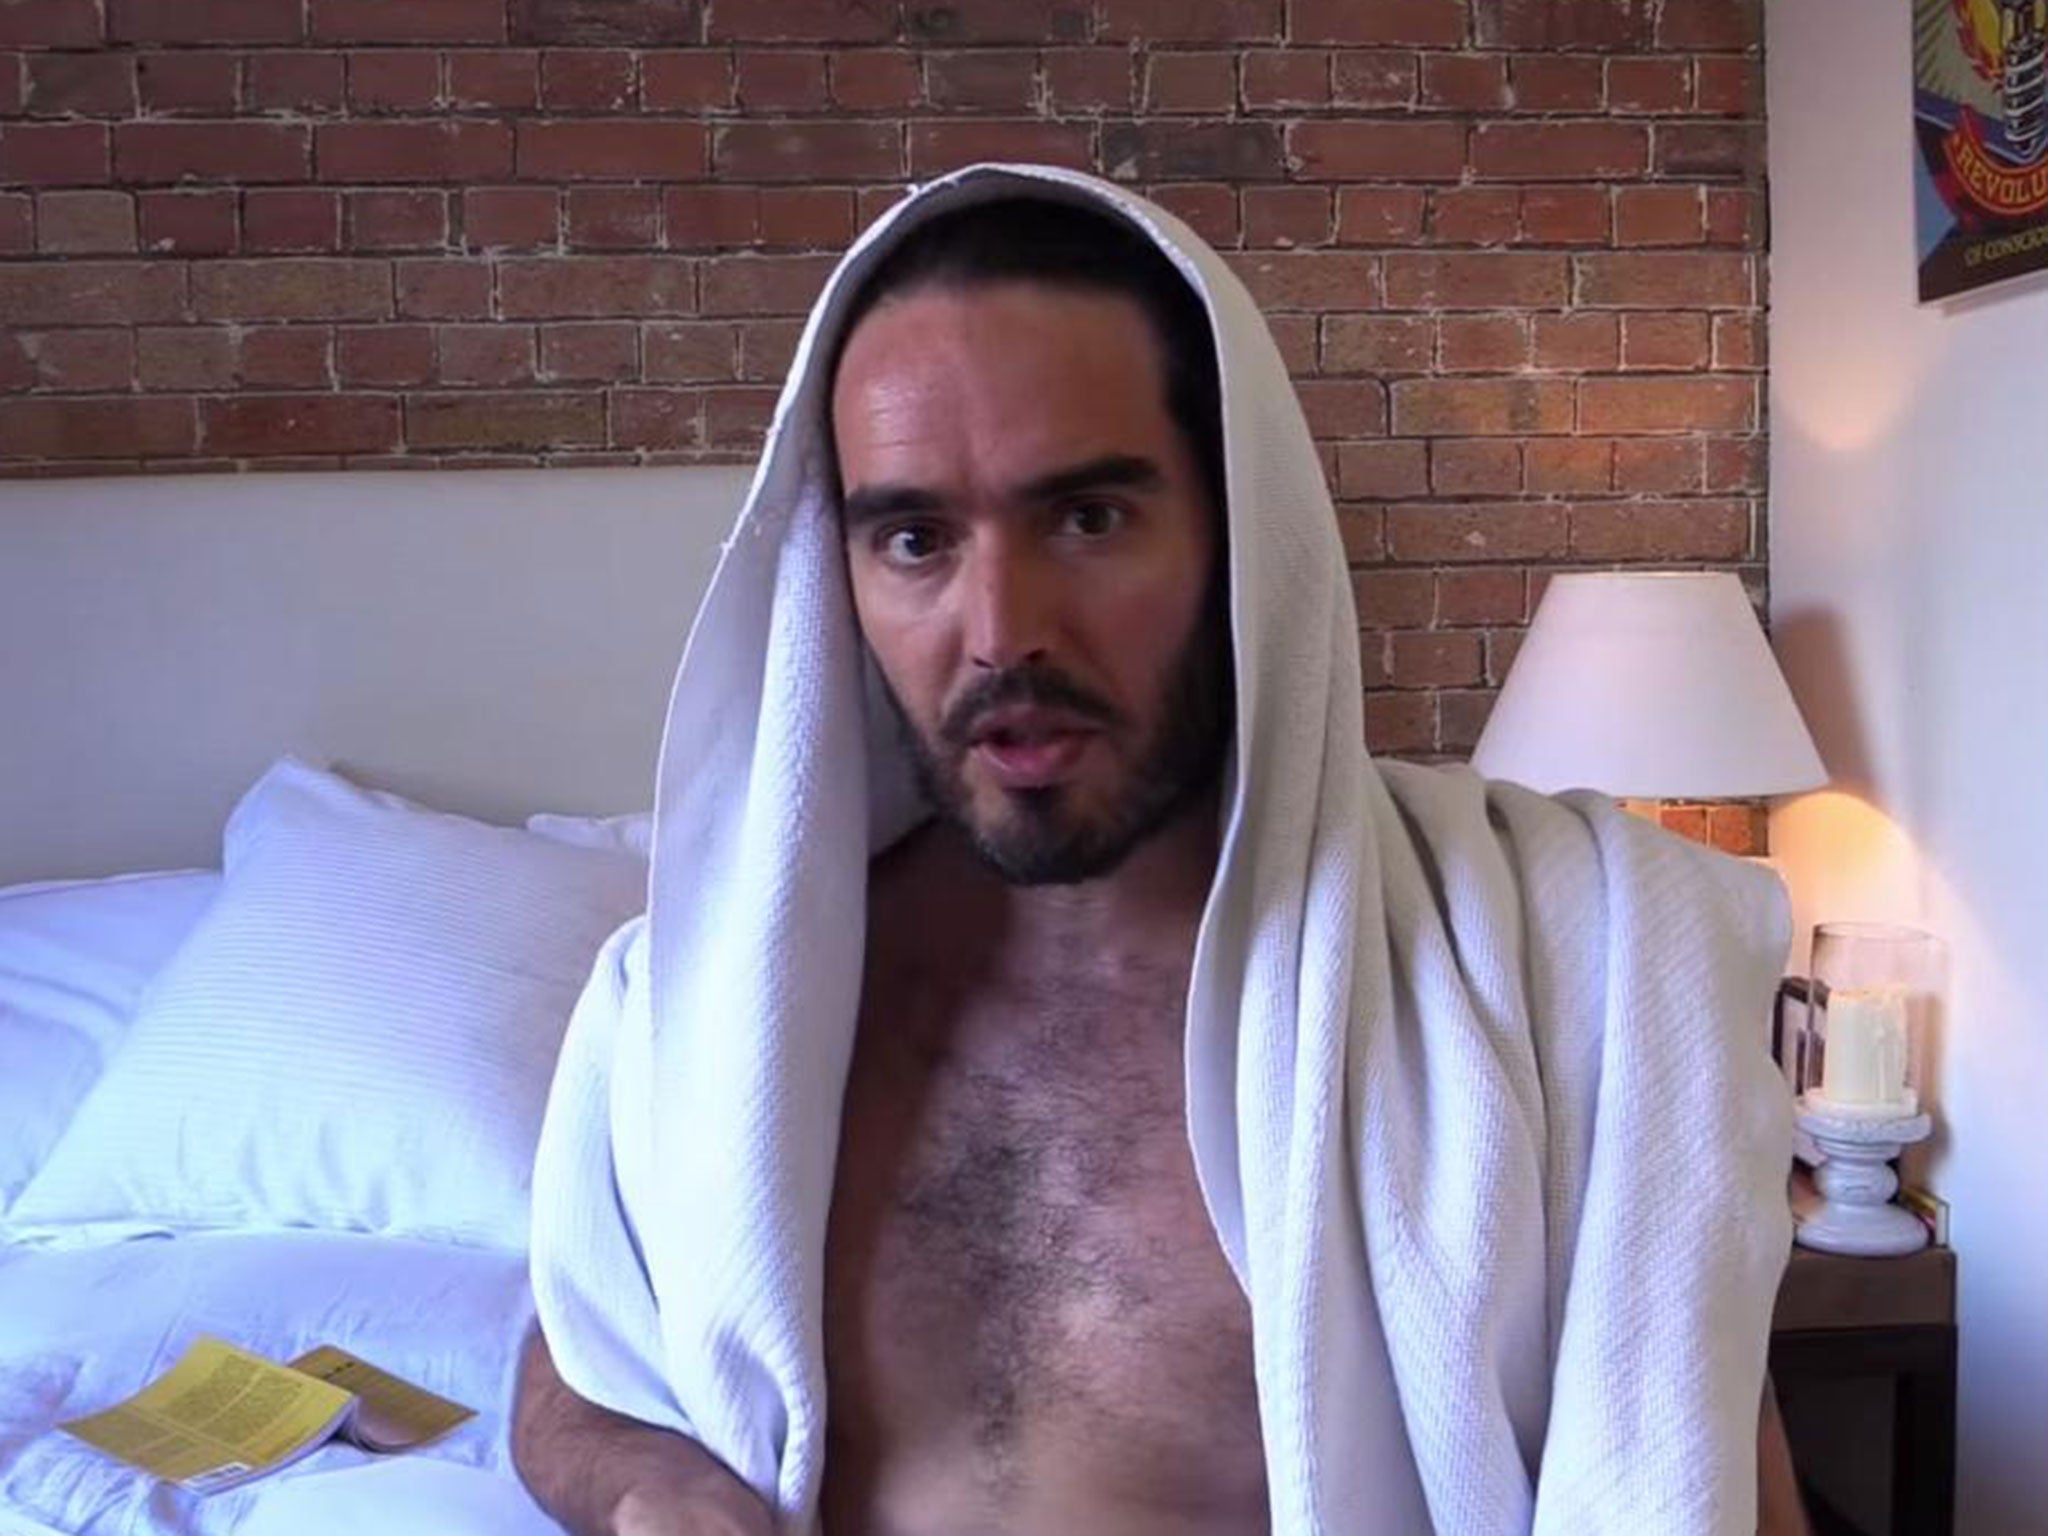 Russell Brand discusses Trident and the NHS in an episode of the The Trews.